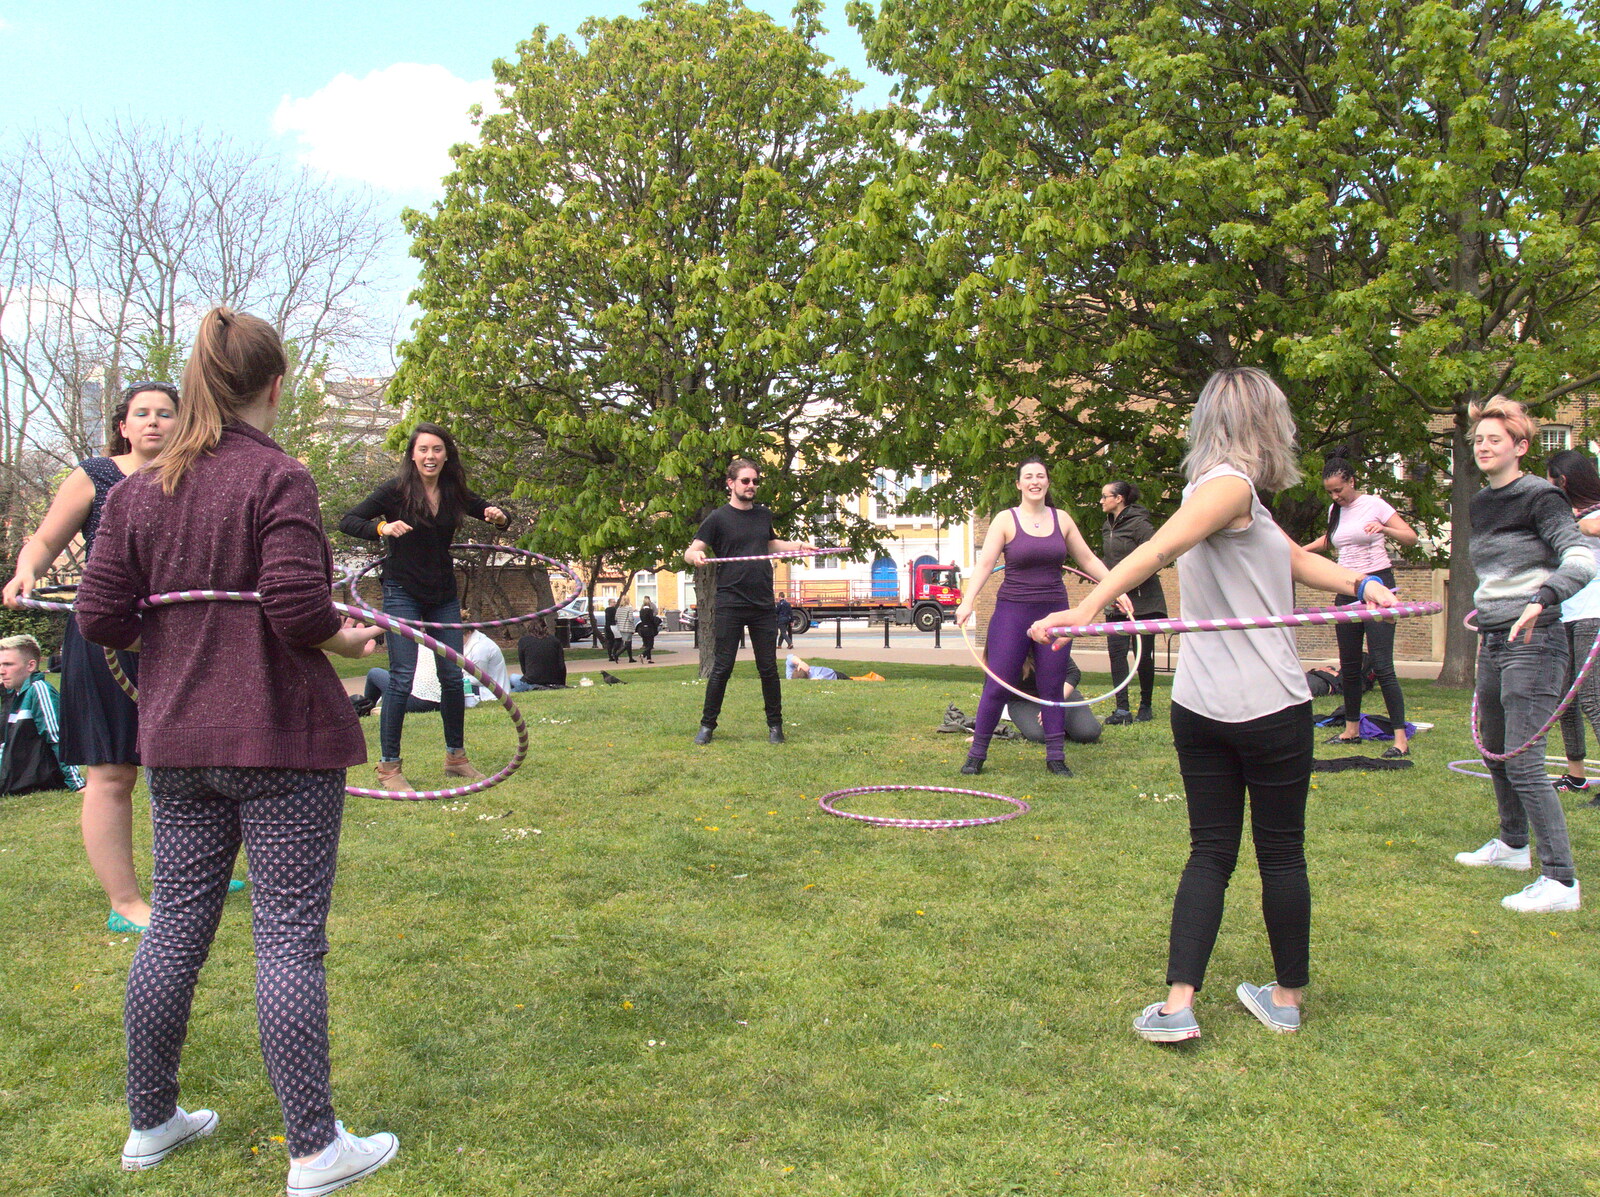 SwiftKey gets hula-hooping from The BSCC at the Hoxne Swan, and Mint Street Hula, Suffolk and London - 4th May 2016